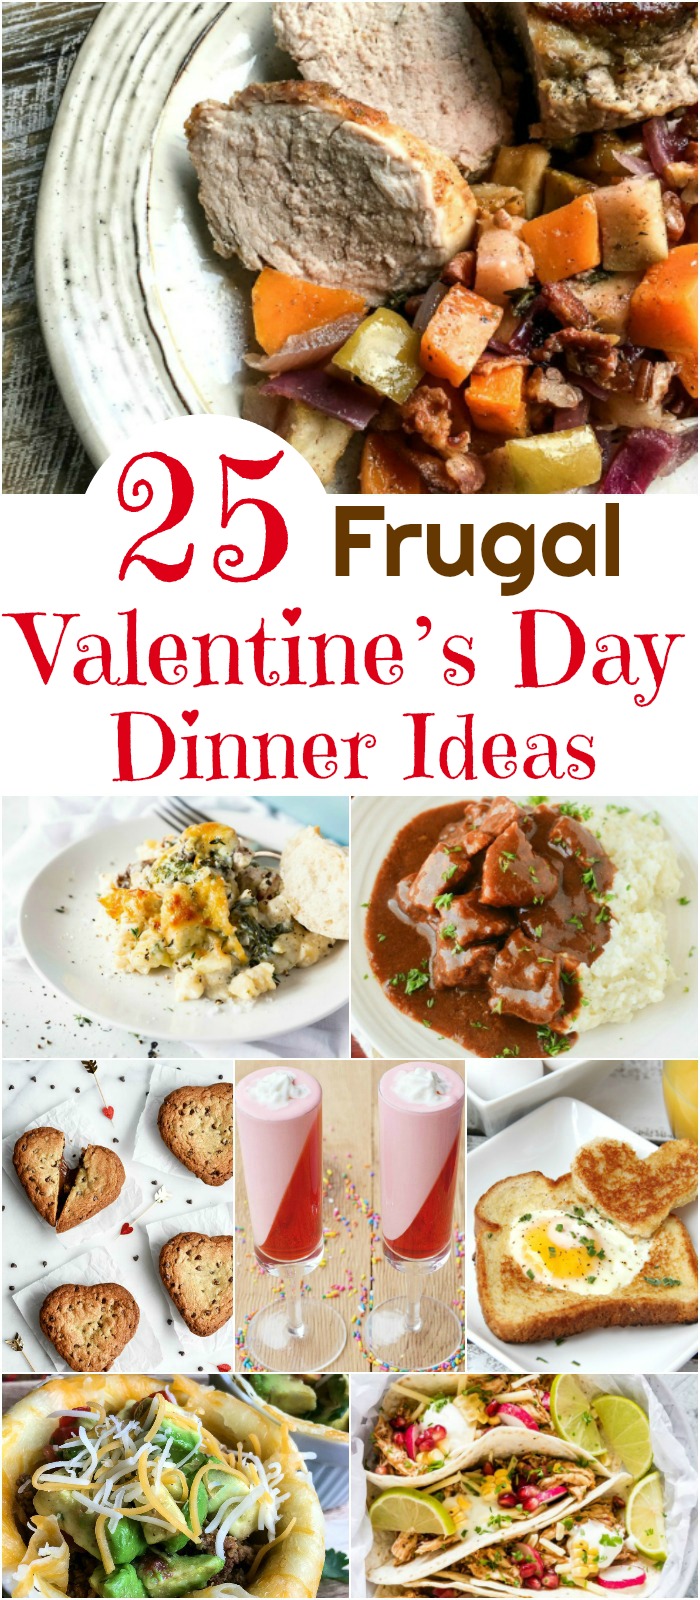 25 Frugal Valentine’s Day Dinner Ideas Your Sweetie Will Love